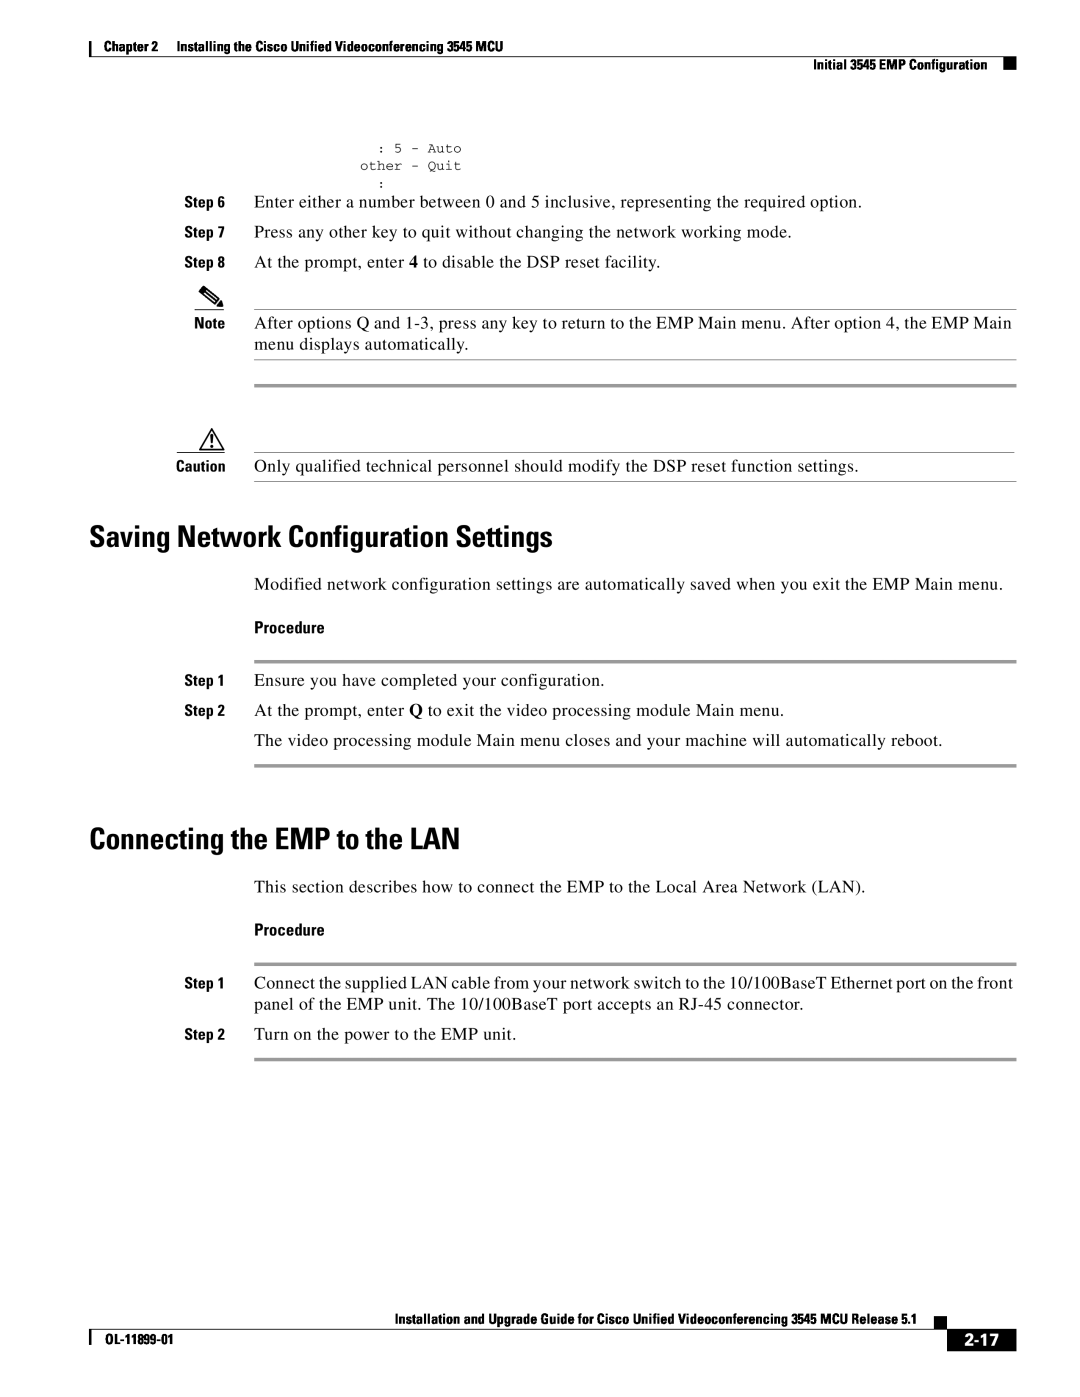 Cisco Systems 3545 MCU manual Saving Network Configuration Settings, Connecting the EMP to the LAN, Procedure, 2-17 